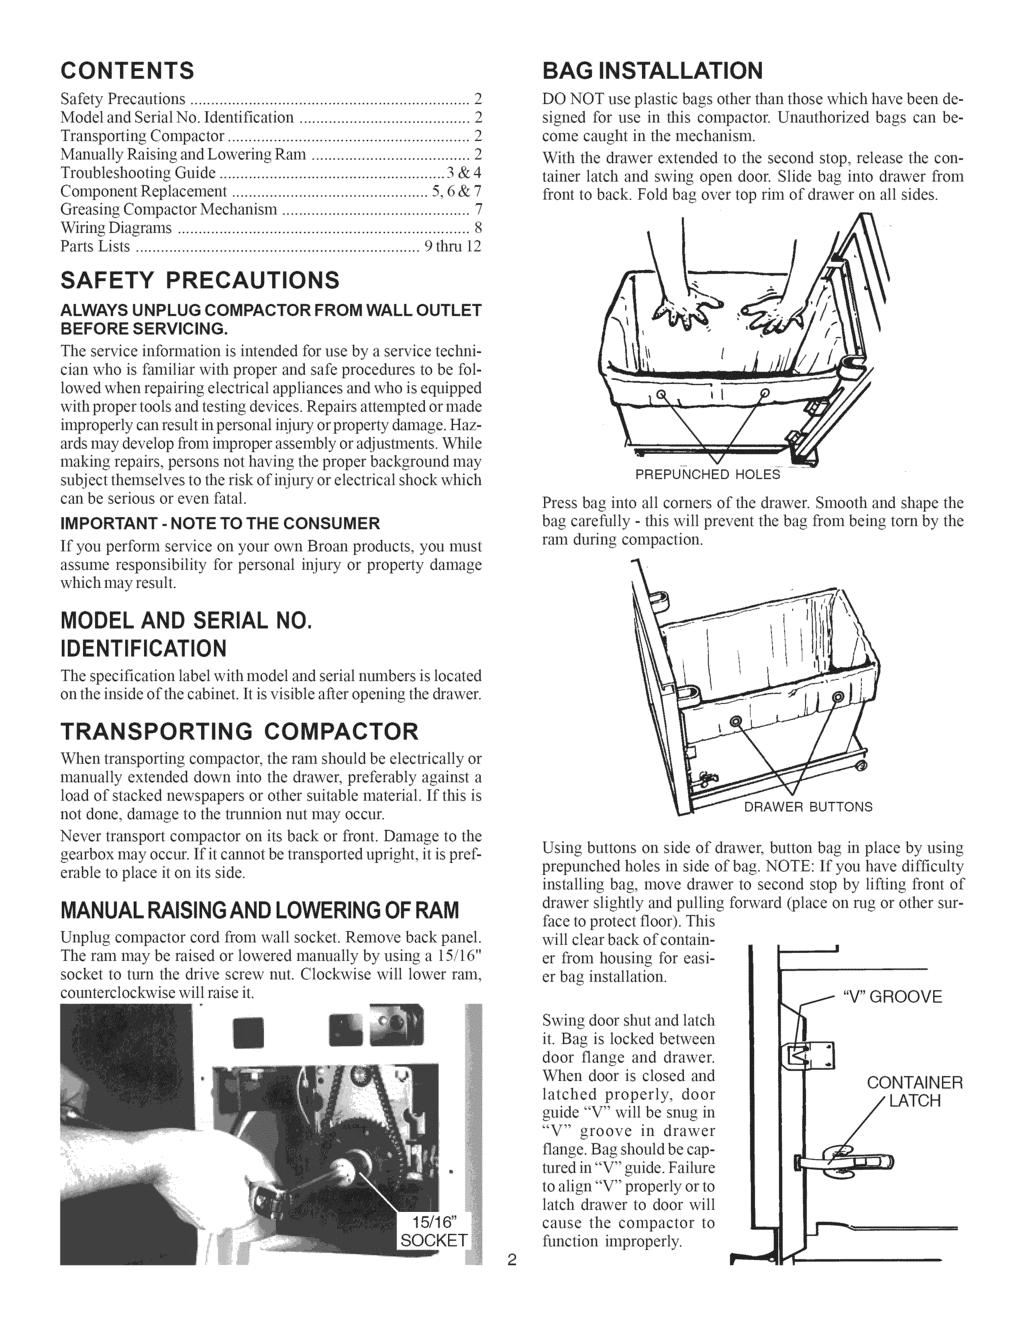 CONTENTS Safety Precautions... 2 Model and Serial No. Identification... 2 Transporting Compactor... 2 Manually Raising and Lowering Ram... 2 Troubleshooting Guide... 3 & 4 Component Replacement.